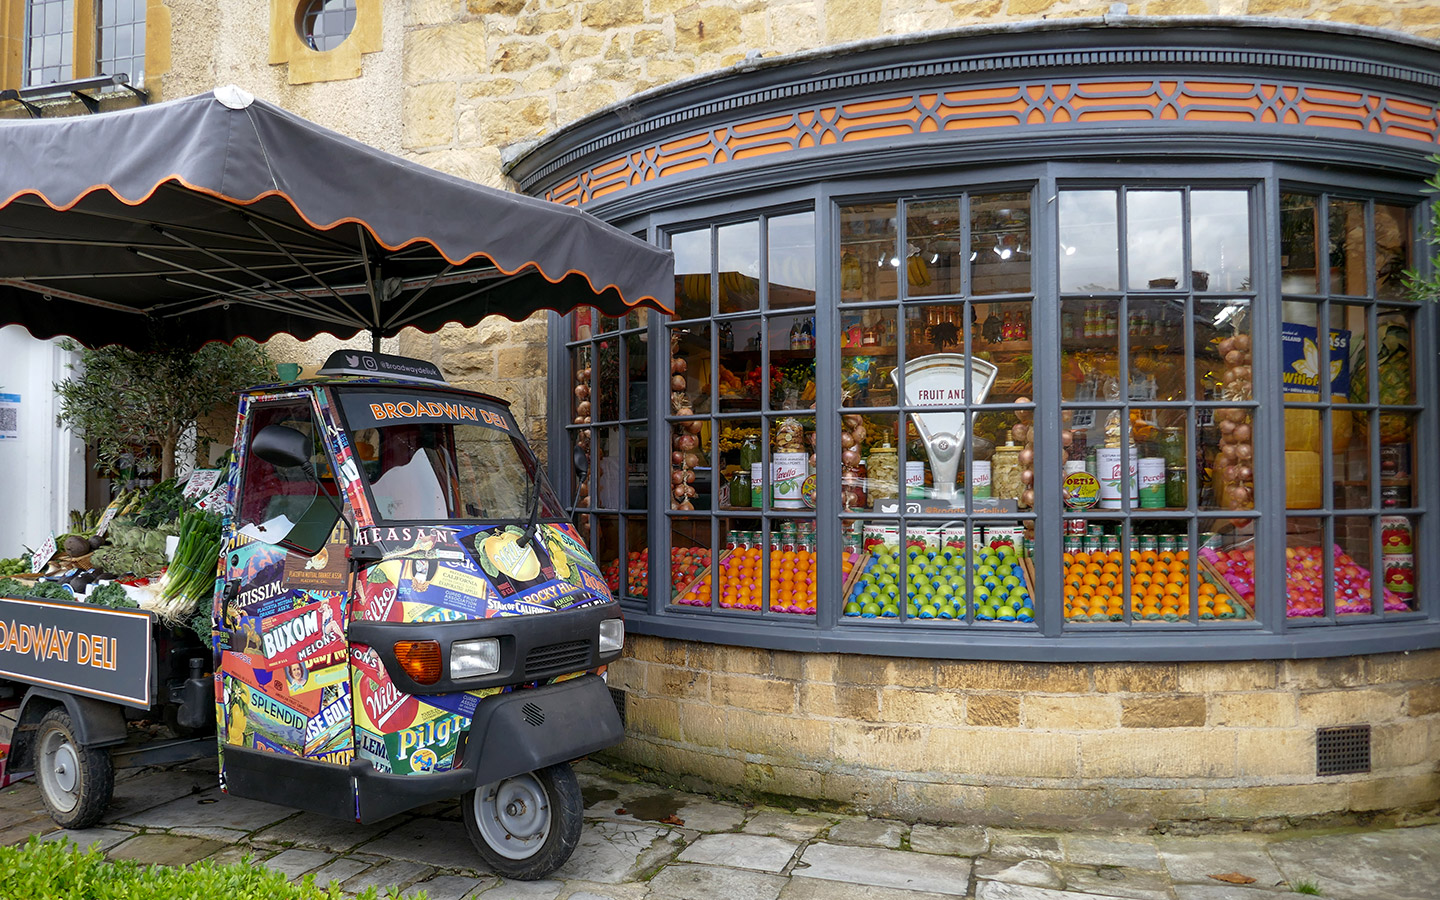 The Broadway Deli in Broadway, Cotswolds